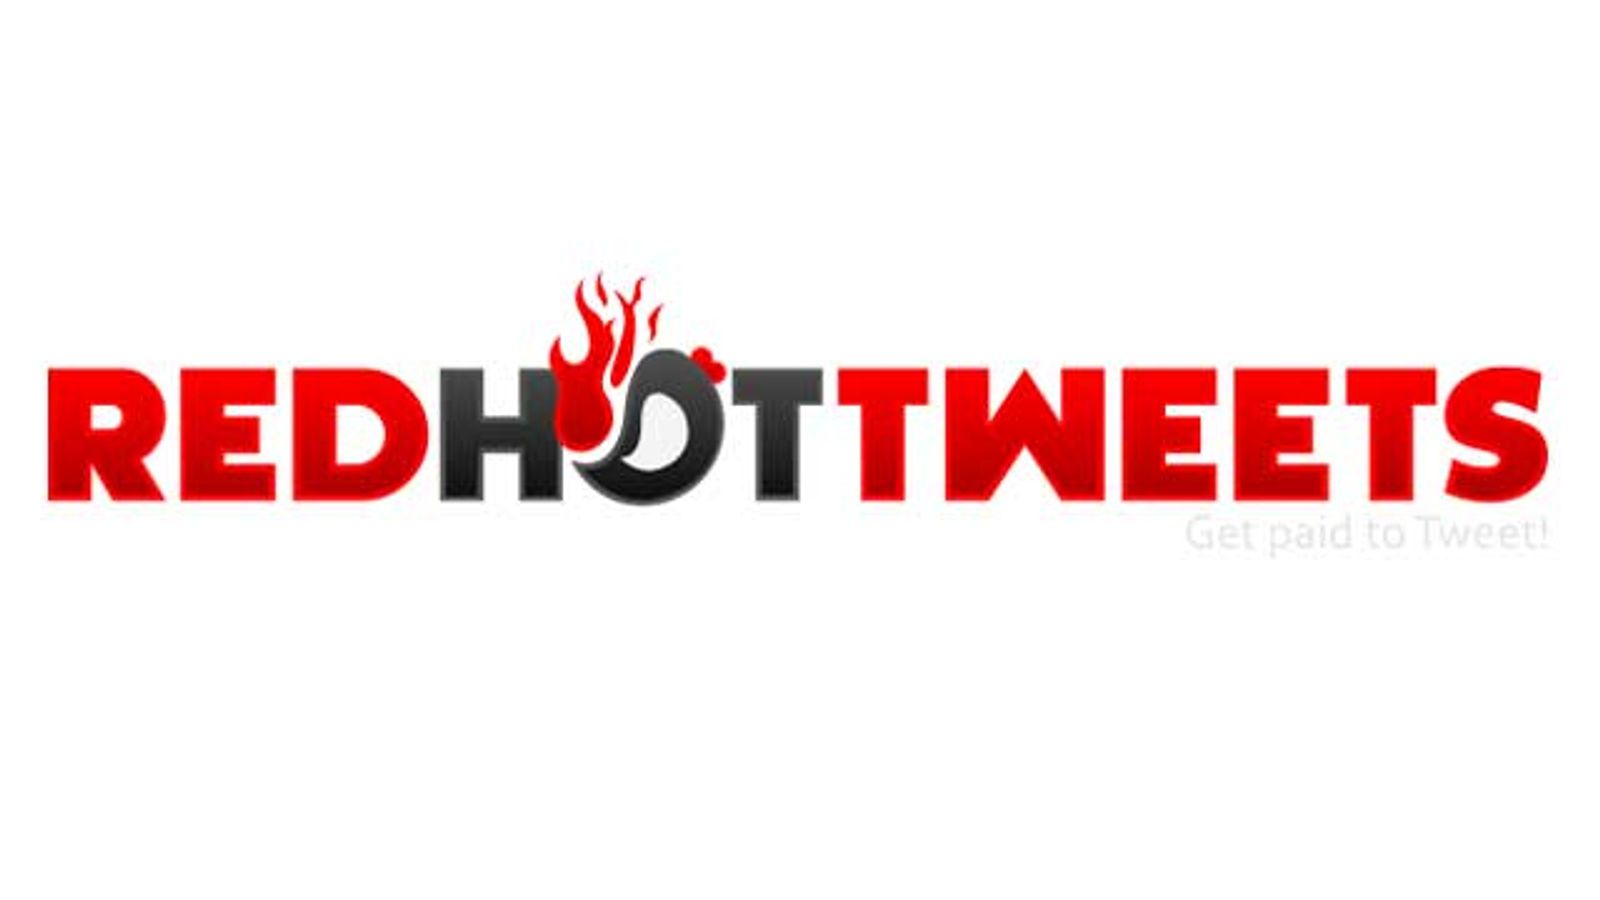 Red Hot Tweets Offers Cold Hard Cash to Adult Performers